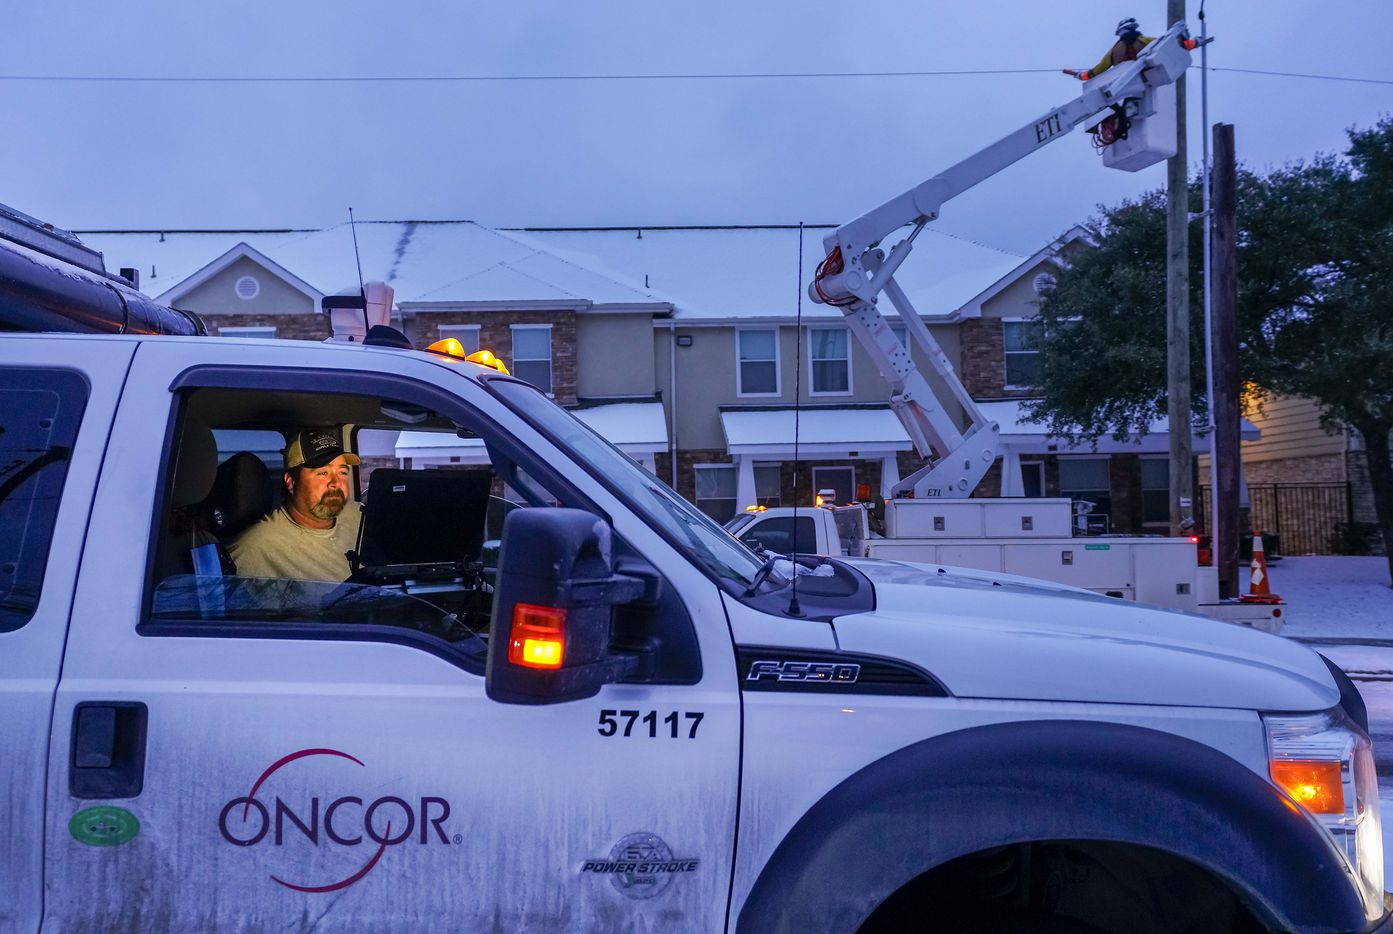 An Oncor crew works on along Elsie Faye Higgins Street as power outages continue across the state after a second winter storm brought more snow and continued freezing temperatures to North Texas on Wednesday, Feb. 17, 2021, in Dallas. (